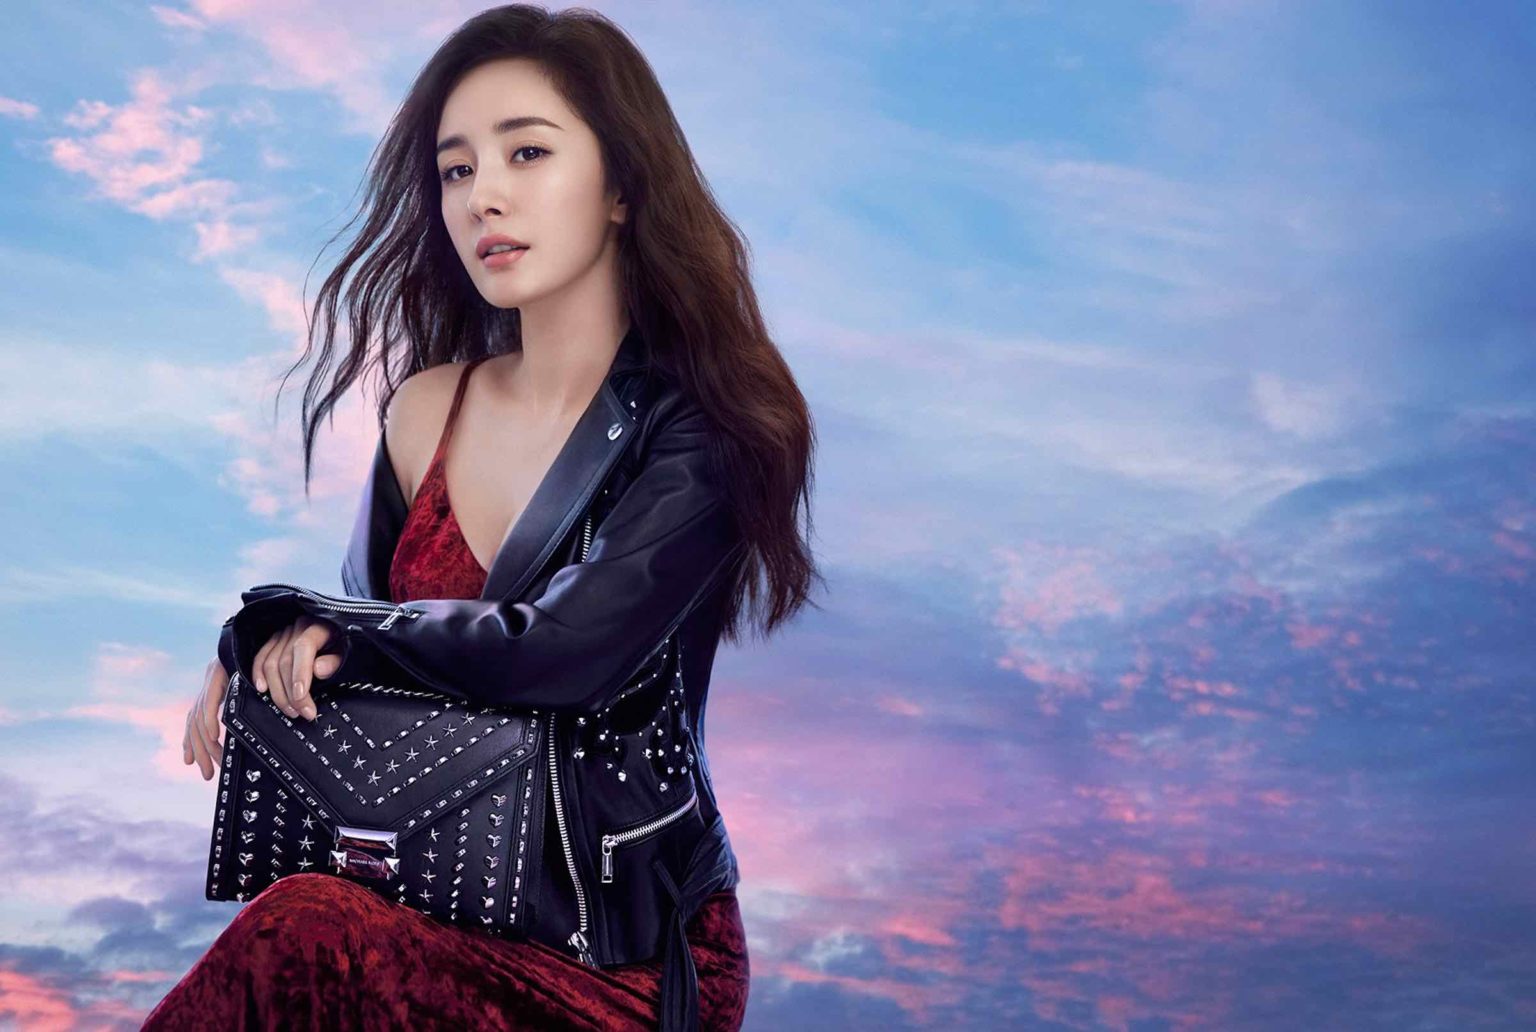 if you’re ready to put in the time to watch Yang Mi in C-dramas, then here are some of our favorite series from Yang Mi.